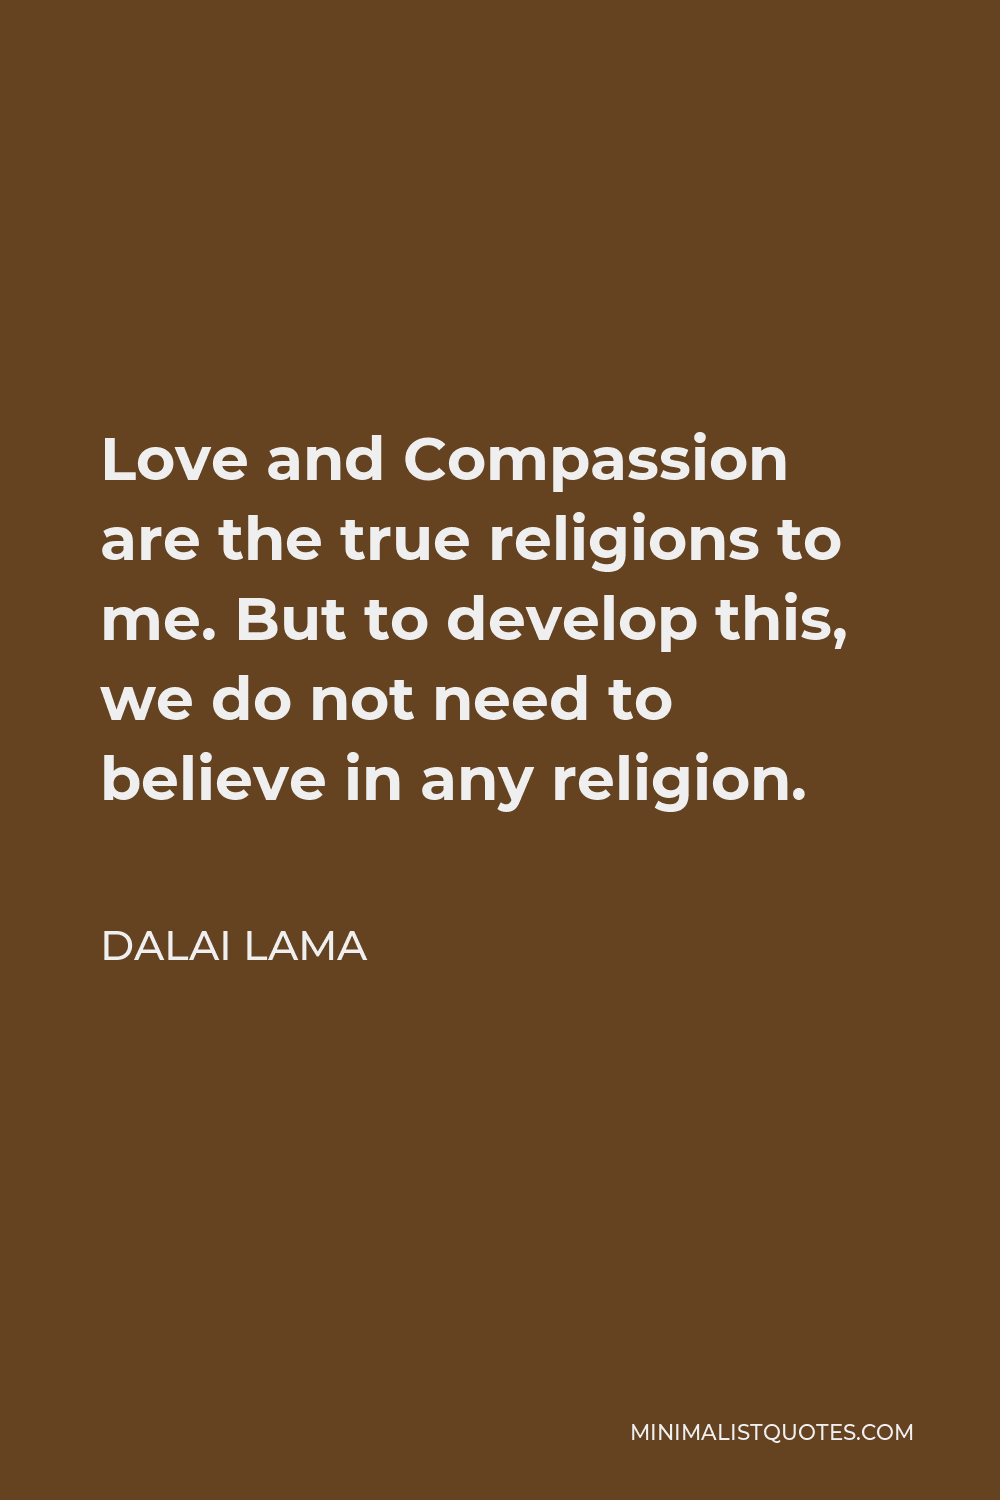 Dalai Lama Quote - Love and Compassion are the true religions to me. But to develop this, we do not need to believe in any religion.